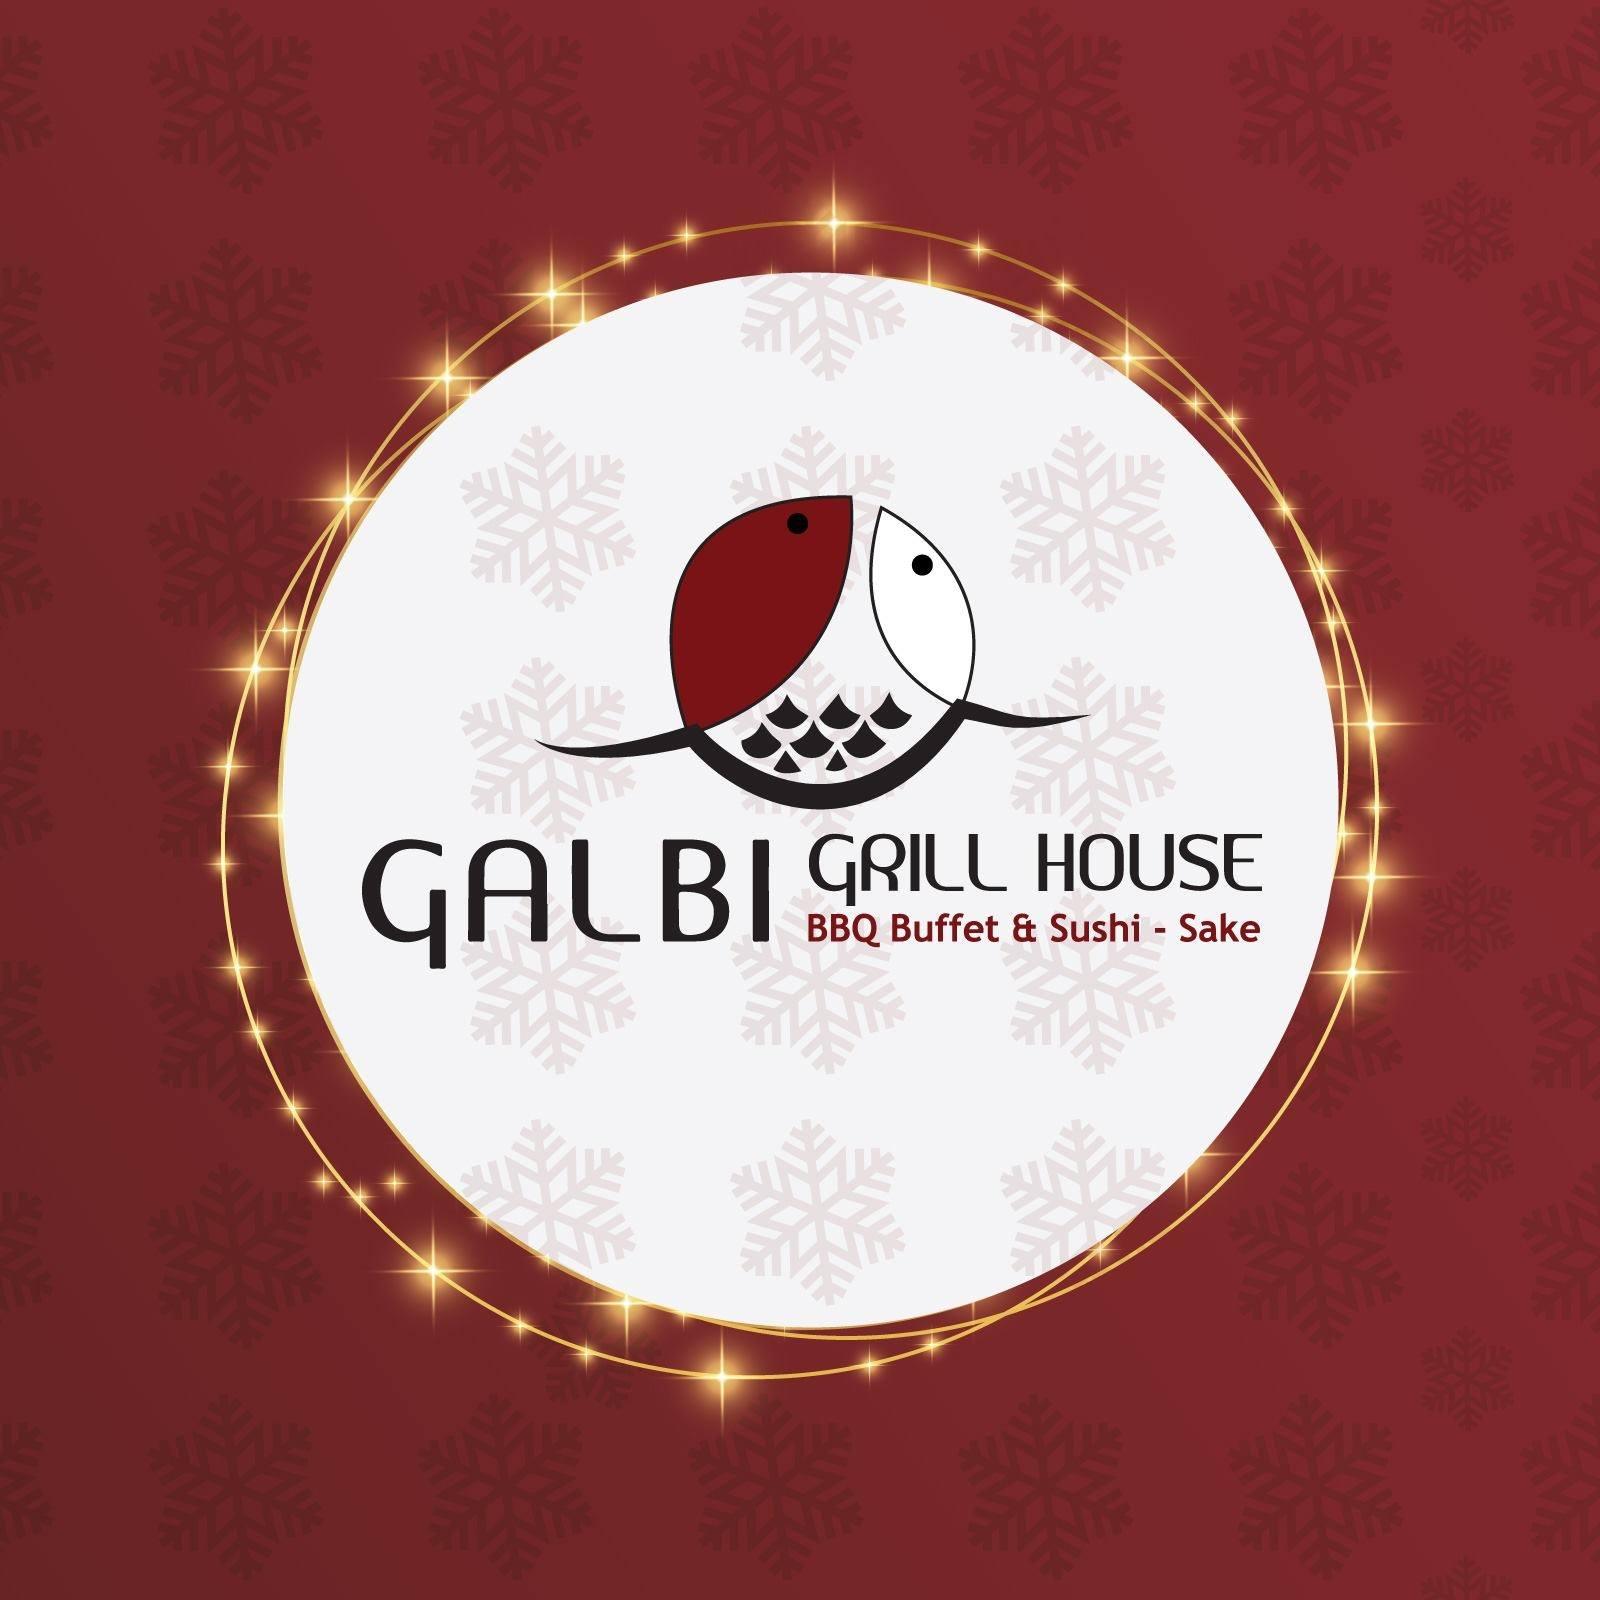 Galbi Grill House